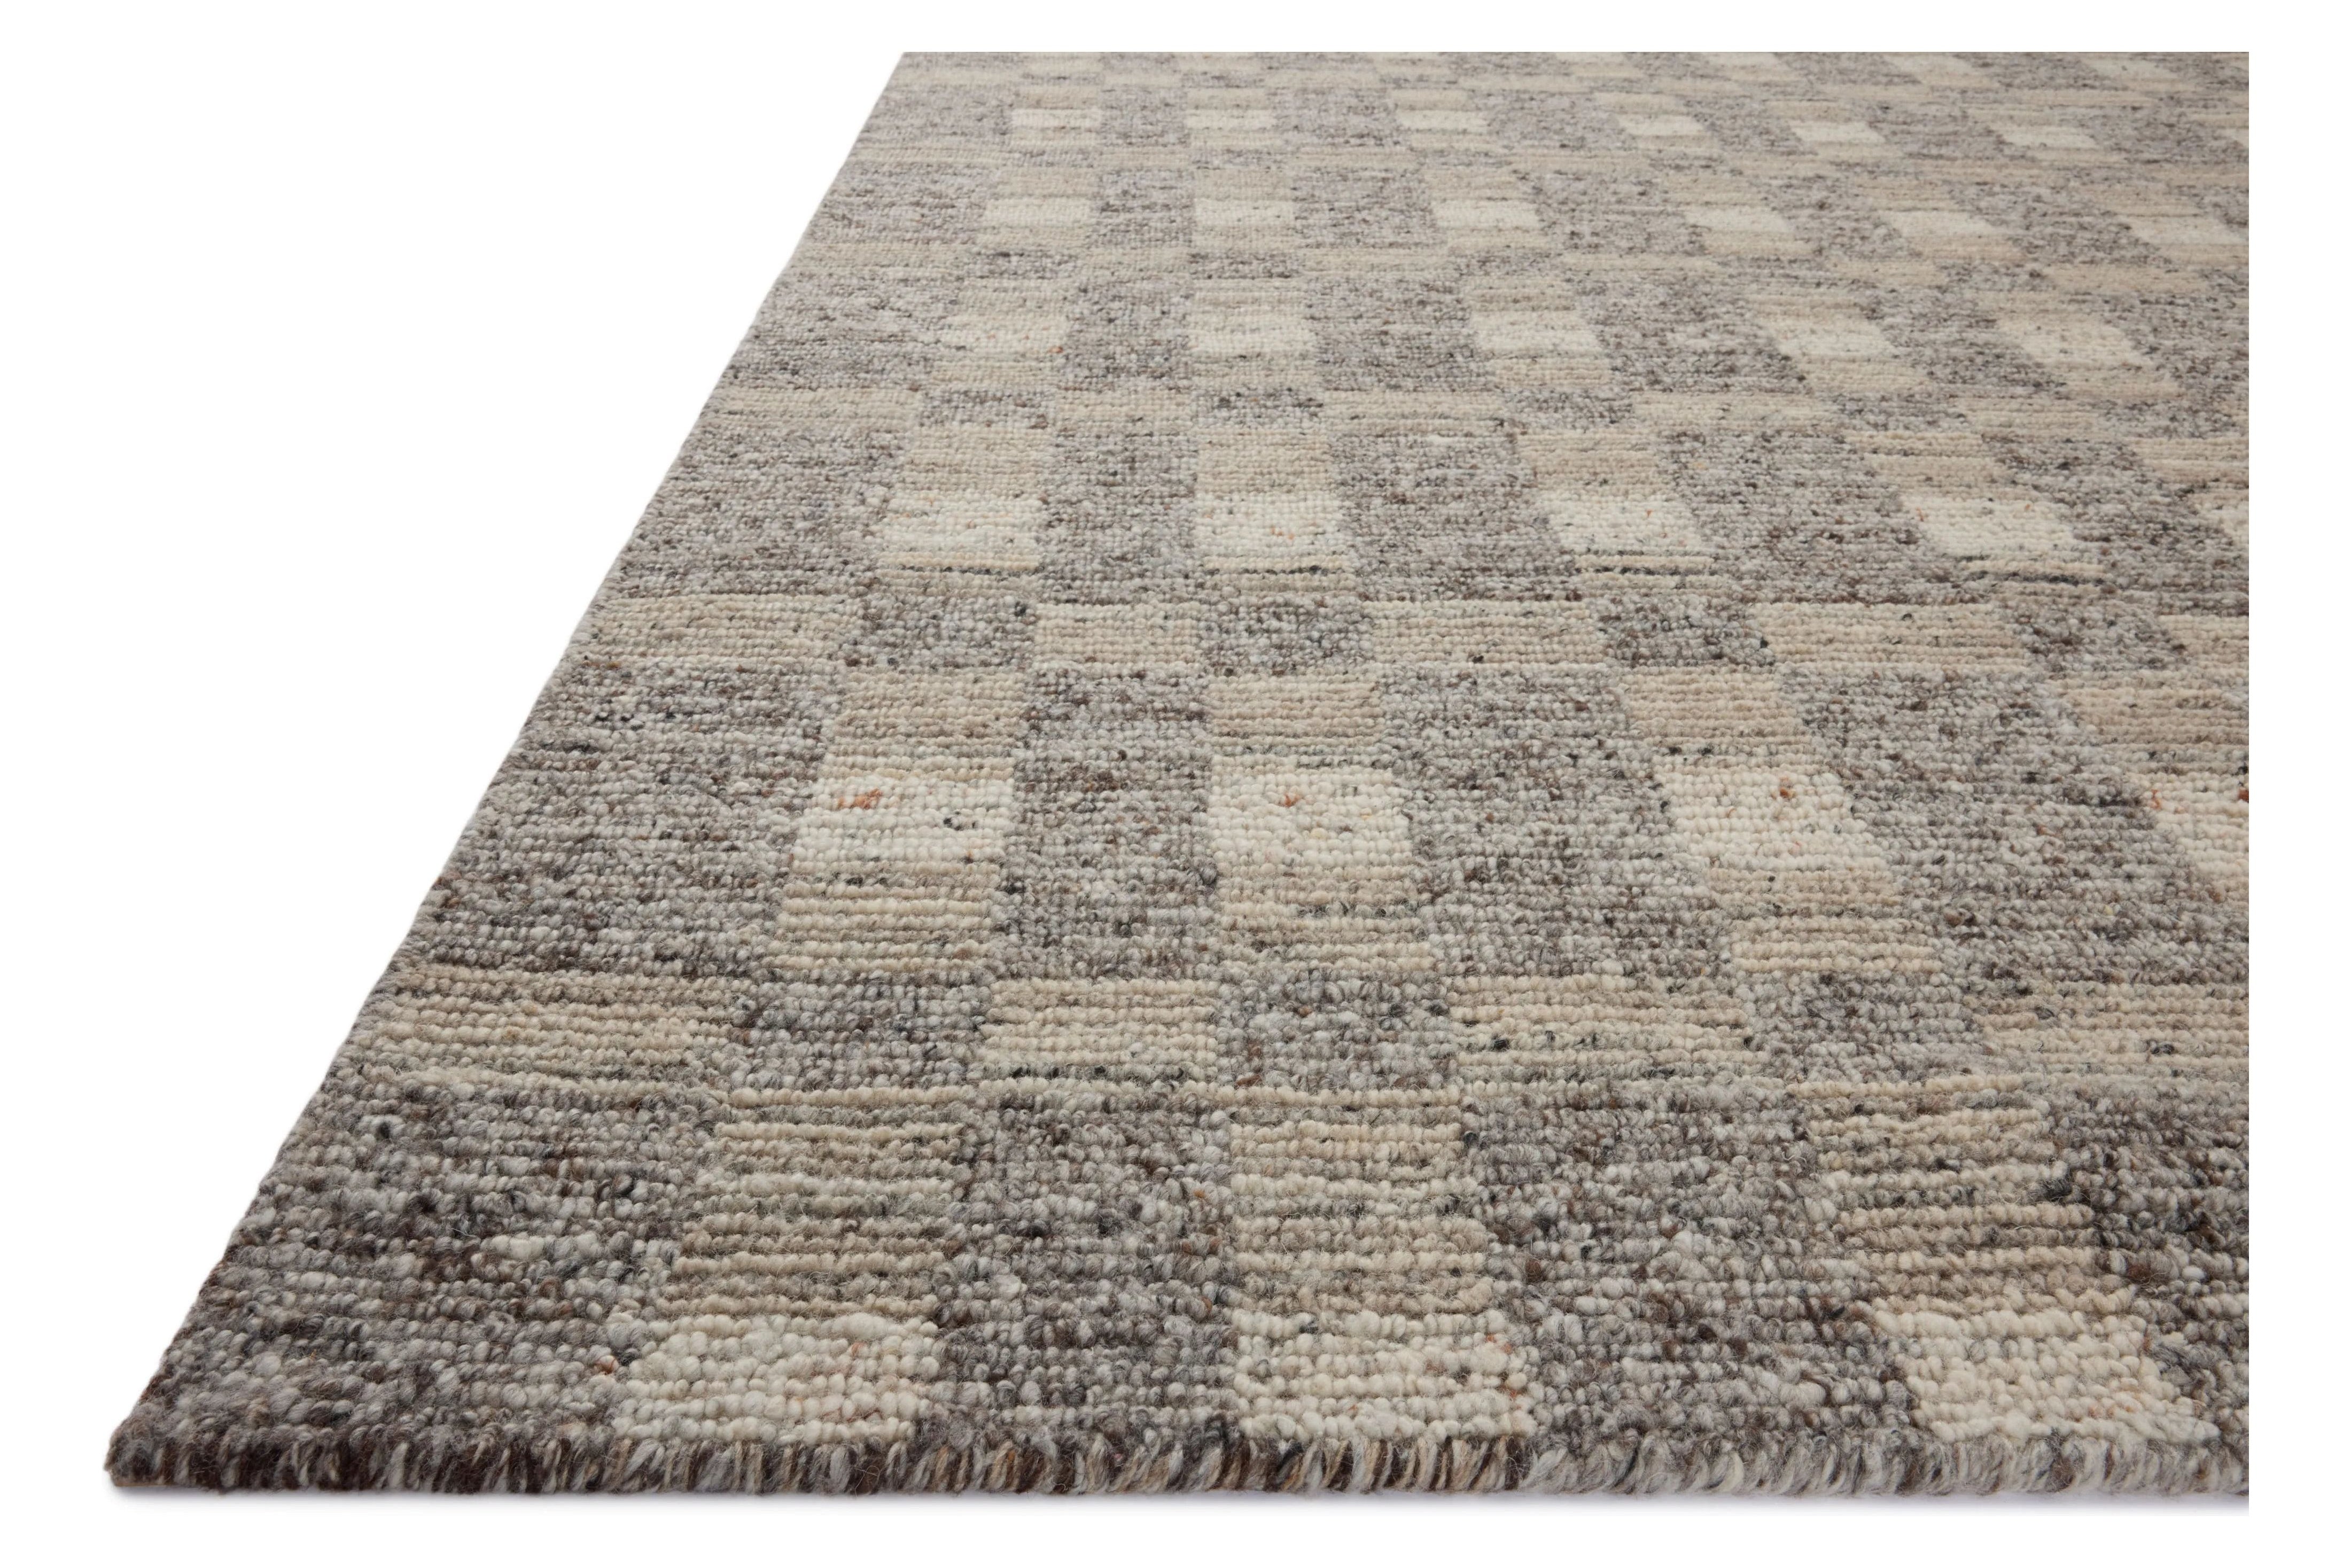 The Sonya Stone / Natural Rug is a hand-loomed area rug with a light, airy palette and understated graphic design. The rug’s textural pile is a soft blend of wool and nylon that creates dimension in living rooms, bedrooms, and more. Amethyst Home provides interior design, new home construction design consulting, vintage area rugs, and lighting in the Des Moines metro area.